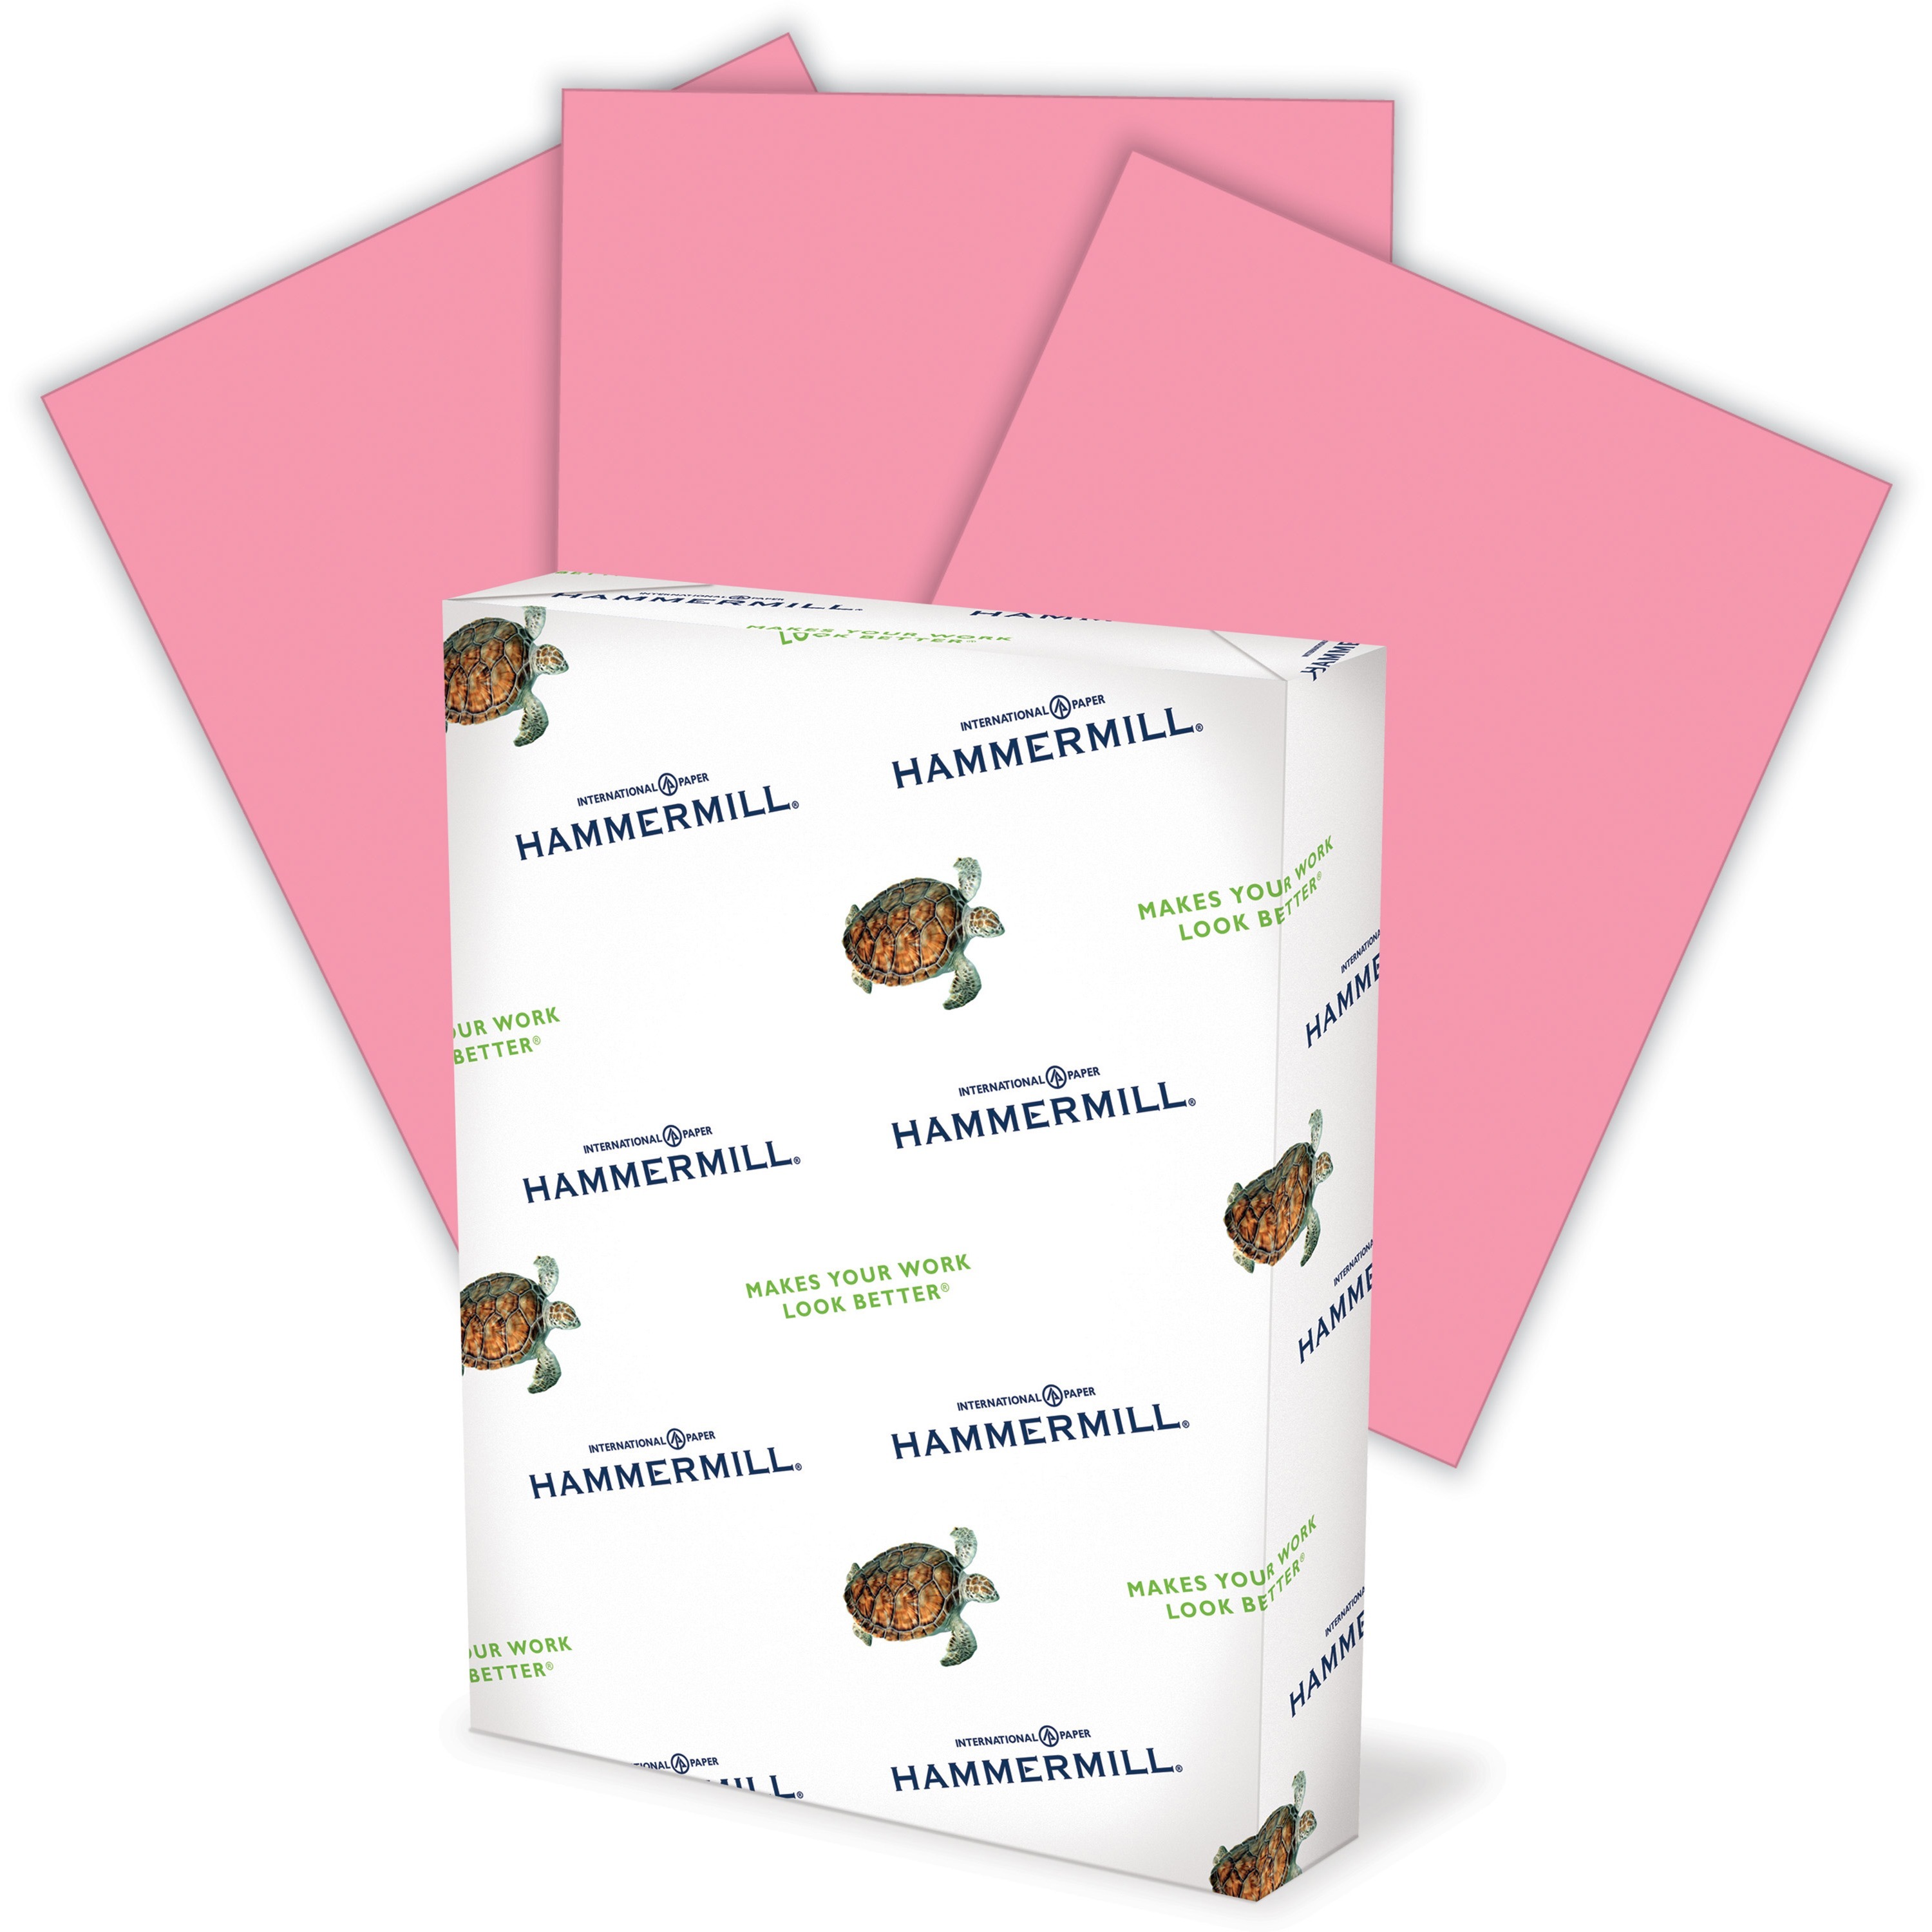 Hammermill Recycled Color Papers, 8.5" x 11", 500 Sheets - image 1 of 2